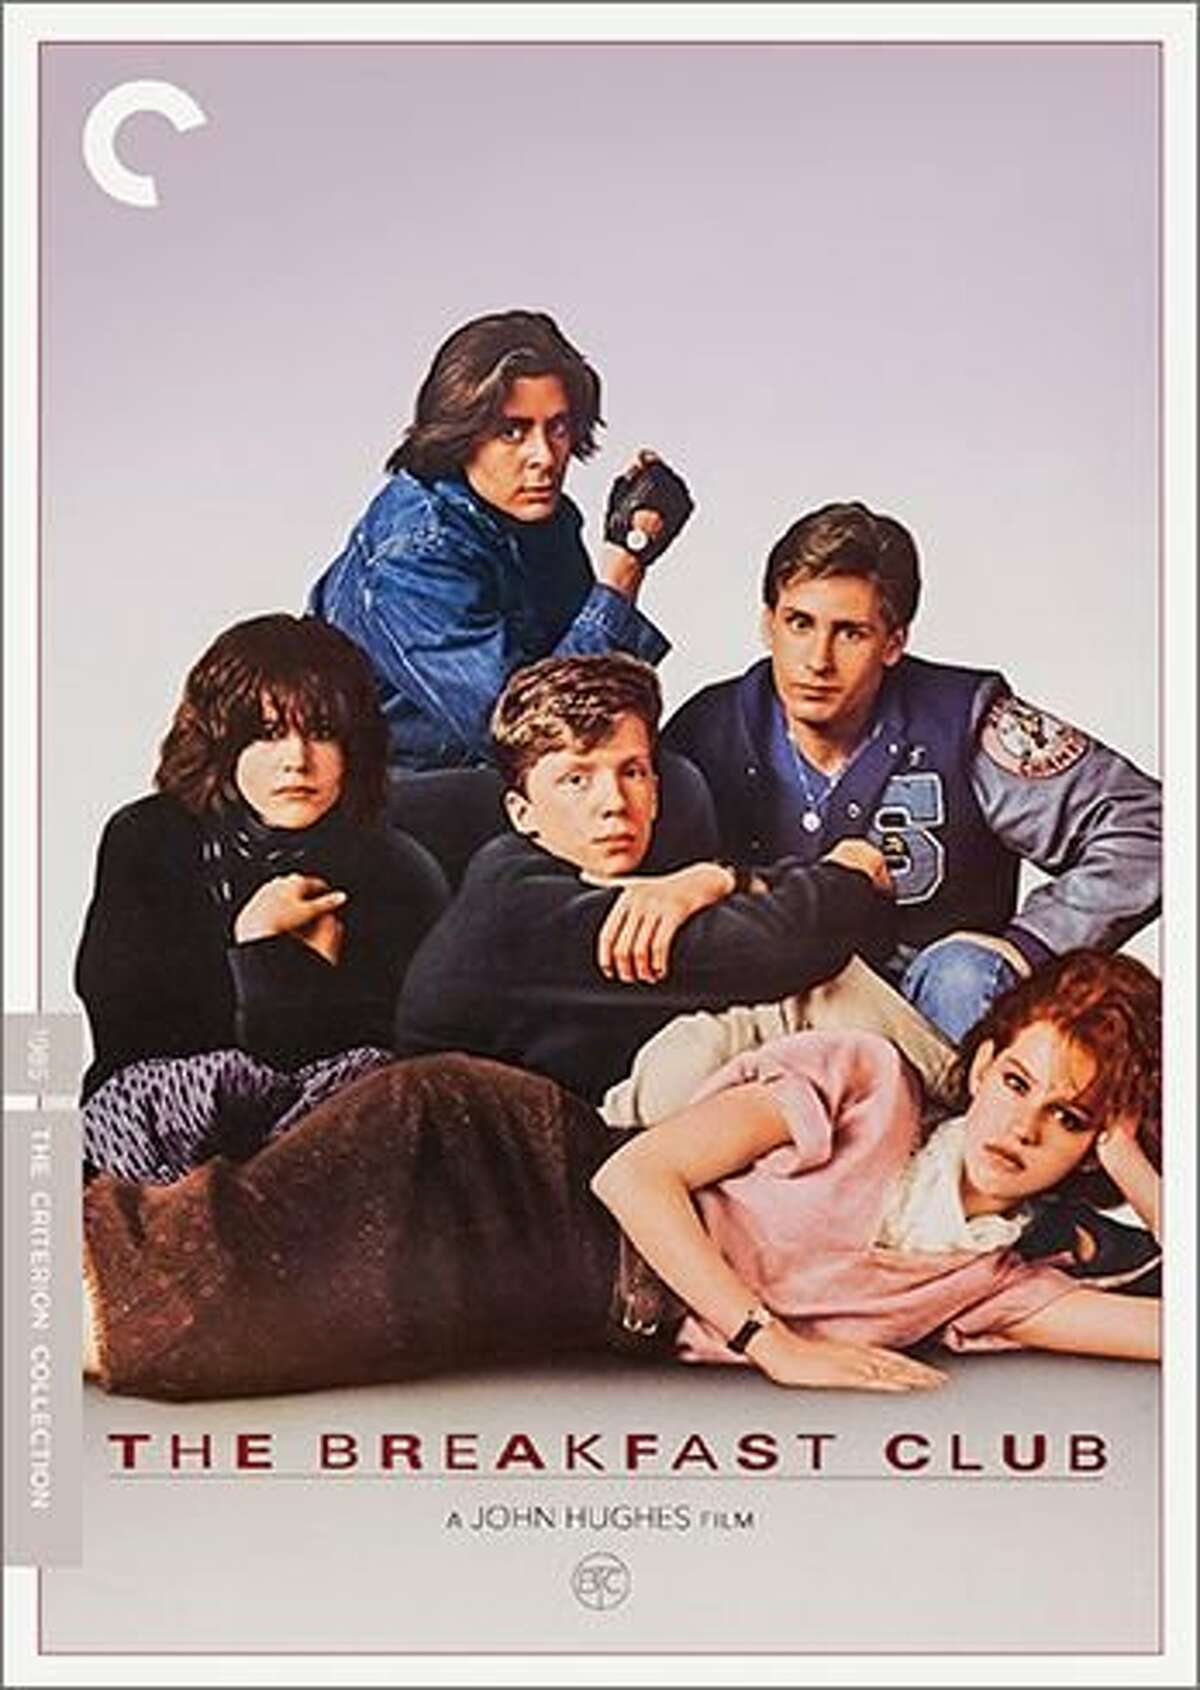 DVD cover: "The Breakfast Club"